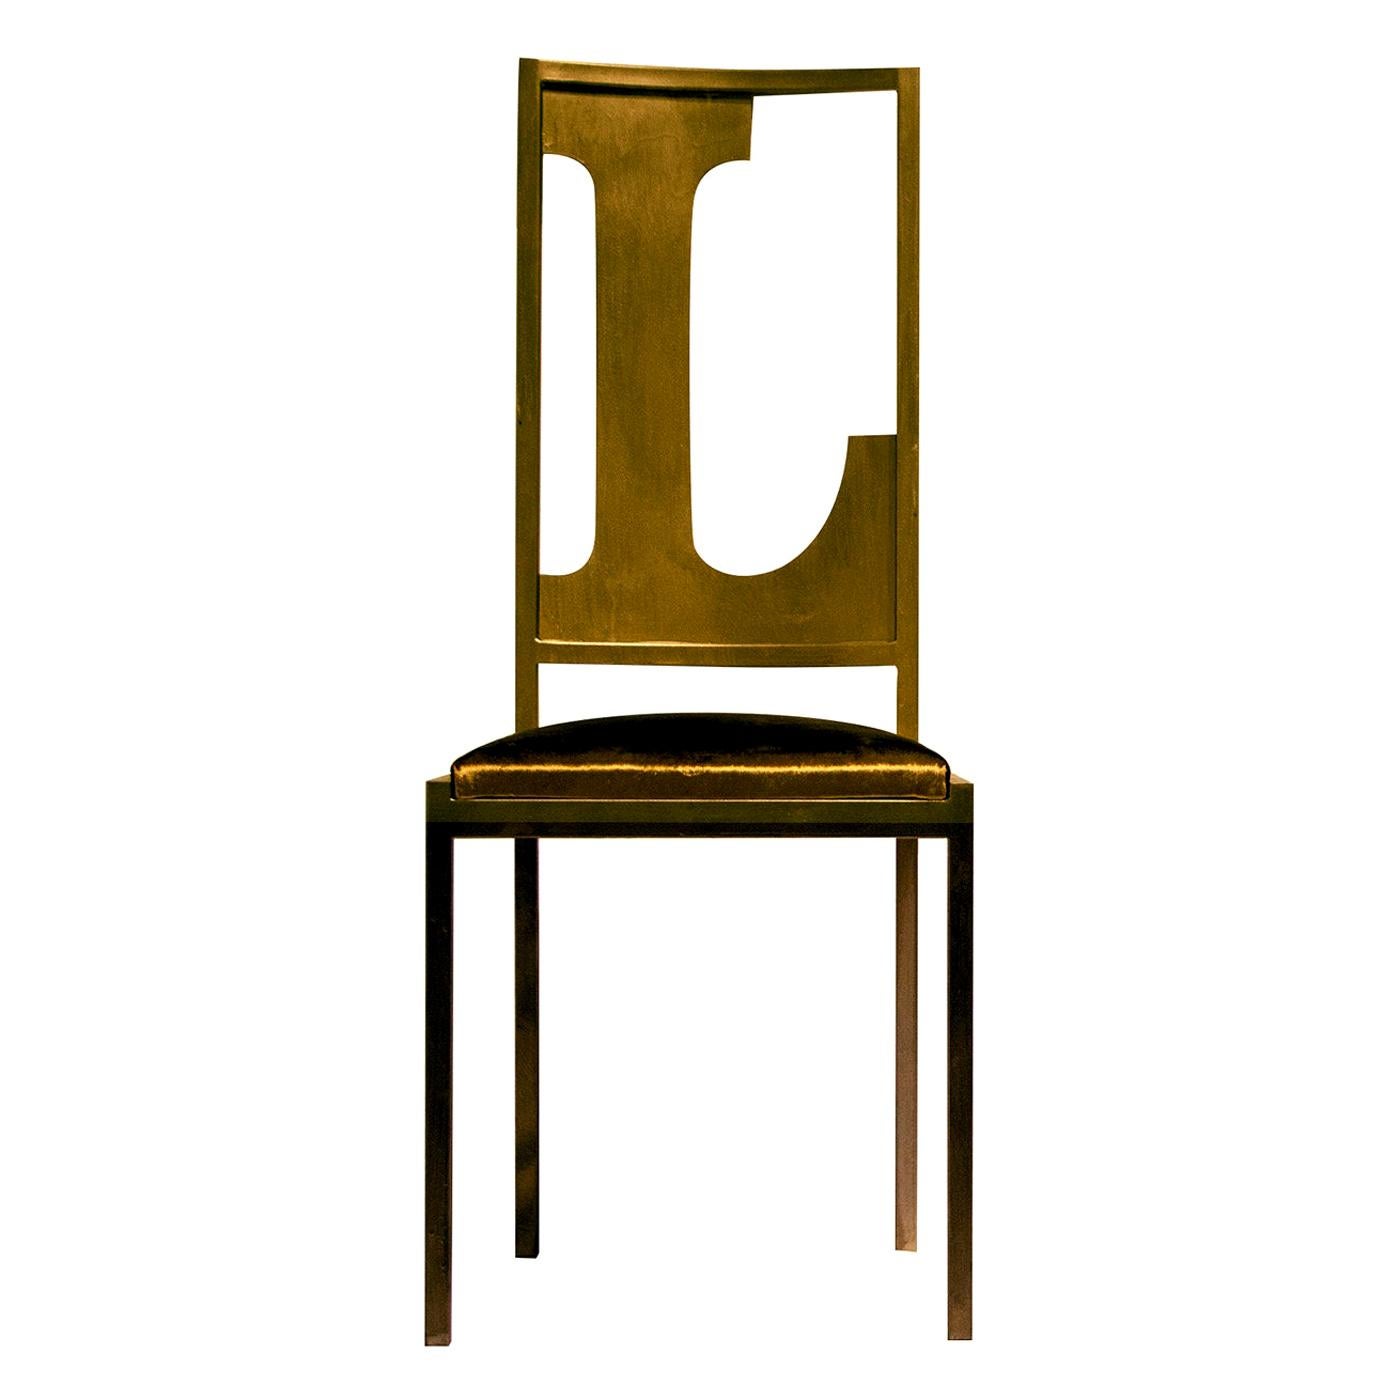 Gold Letter L Chair For Sale